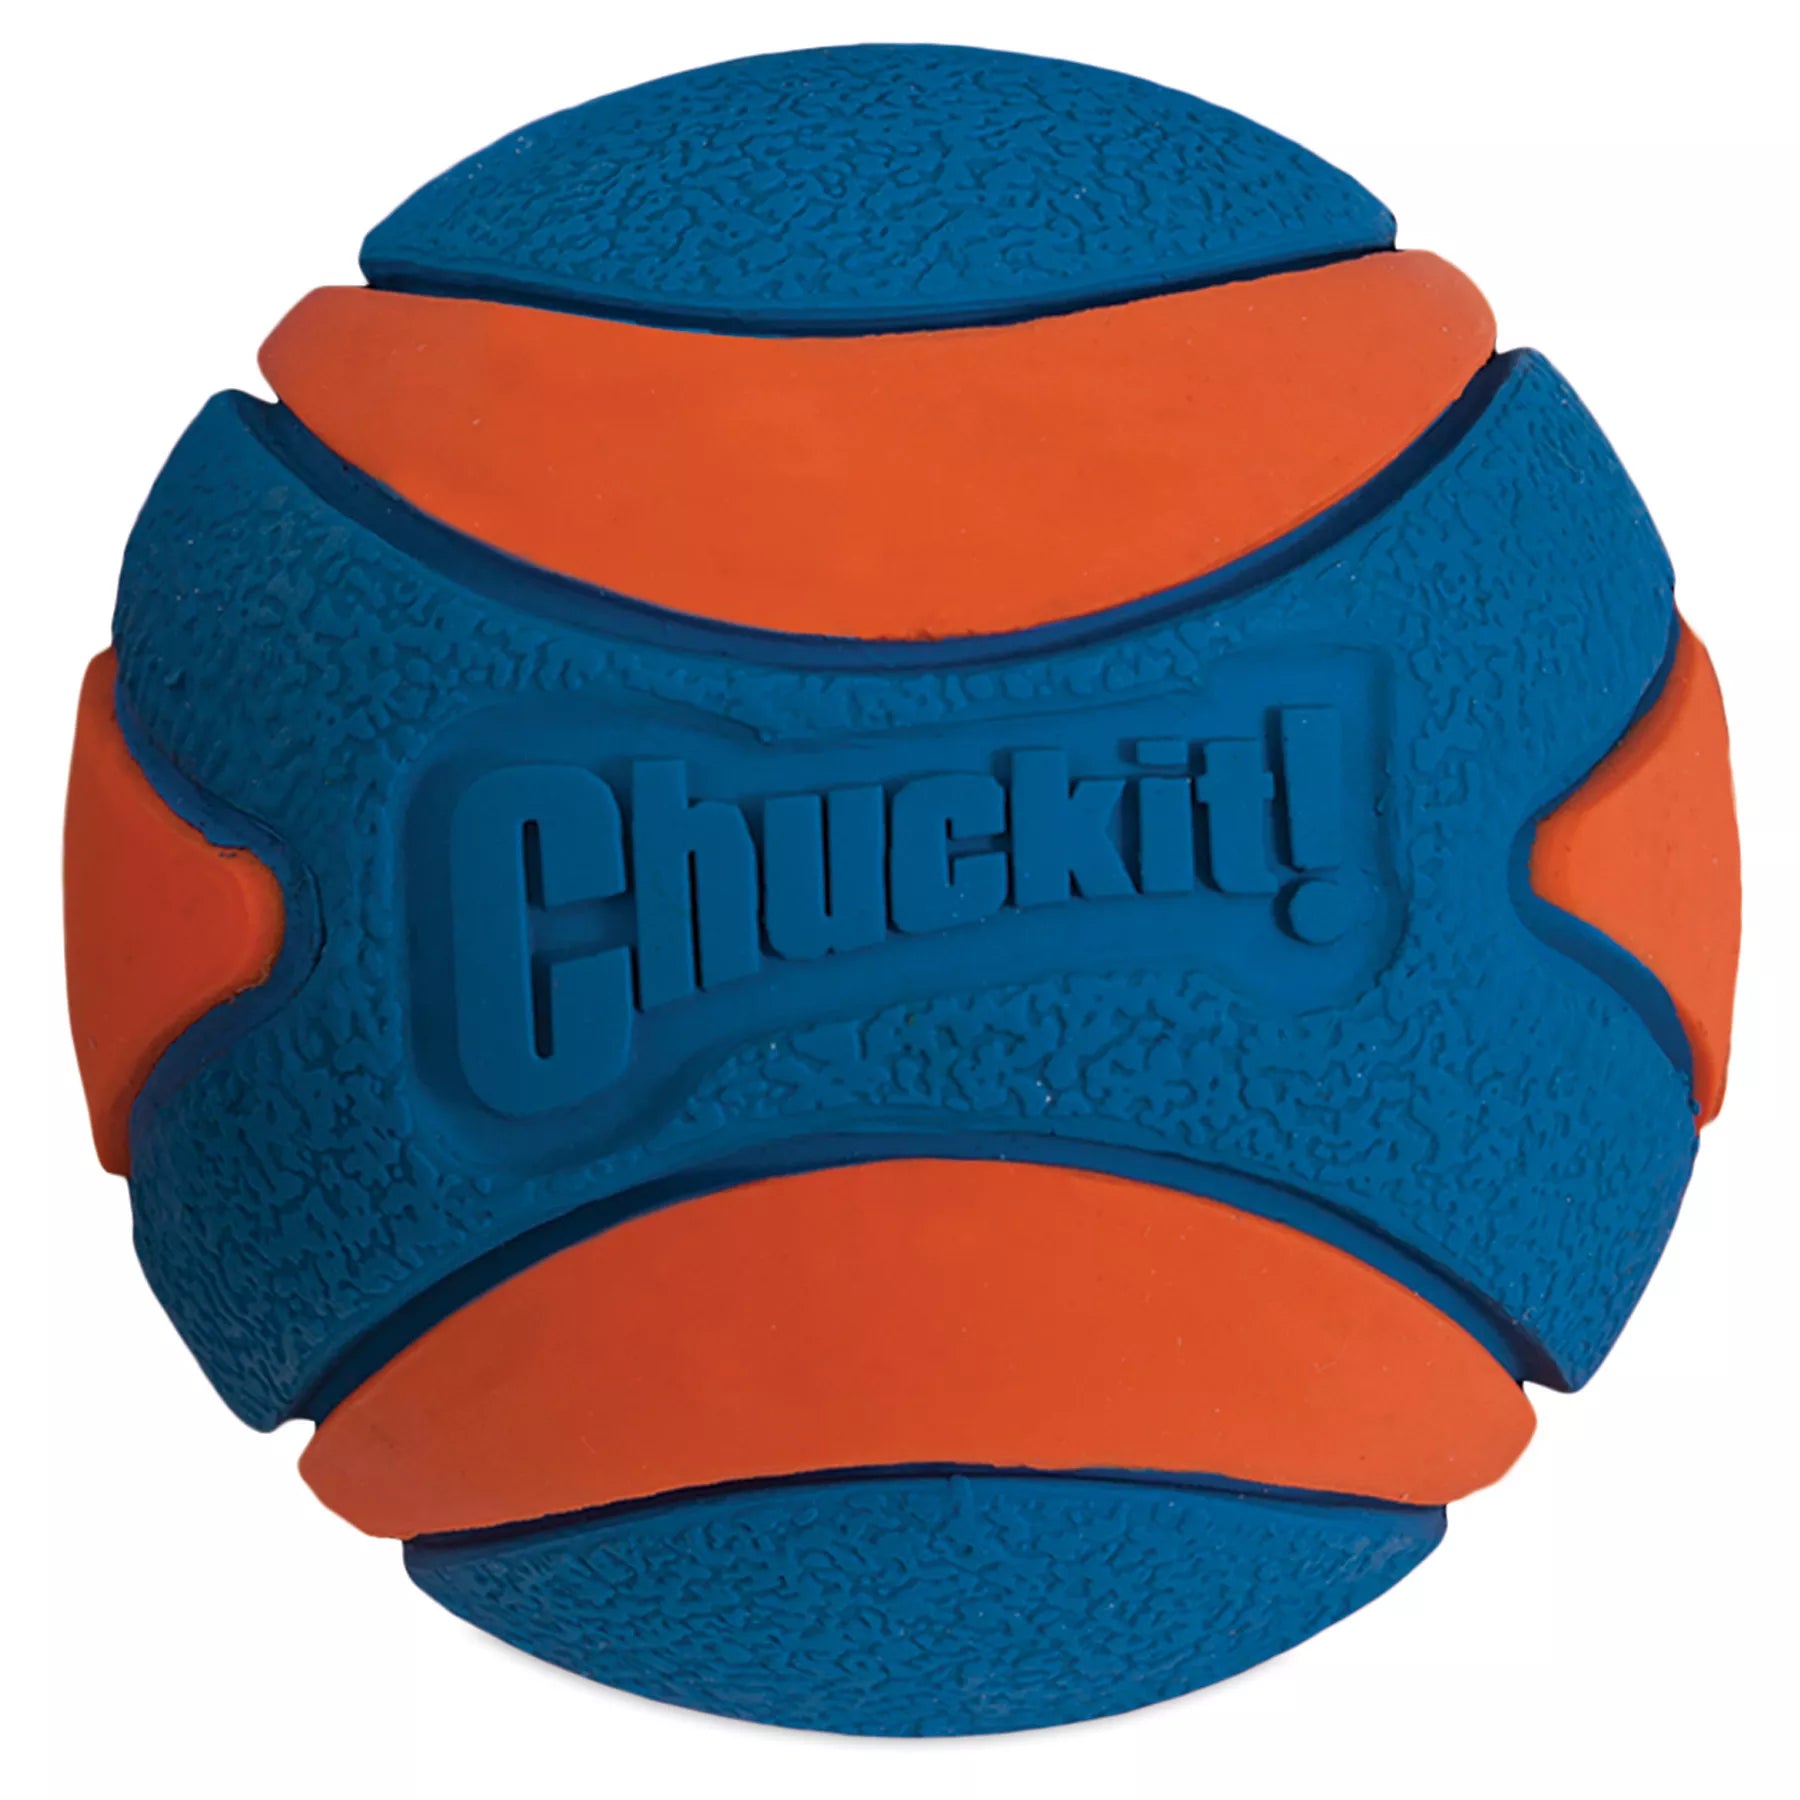 Ultra Squeaker Ball Dog Toy: Exciting, Buoyant, Durable Rubber, Textured Surface  petlums.com SMALL CHINA 